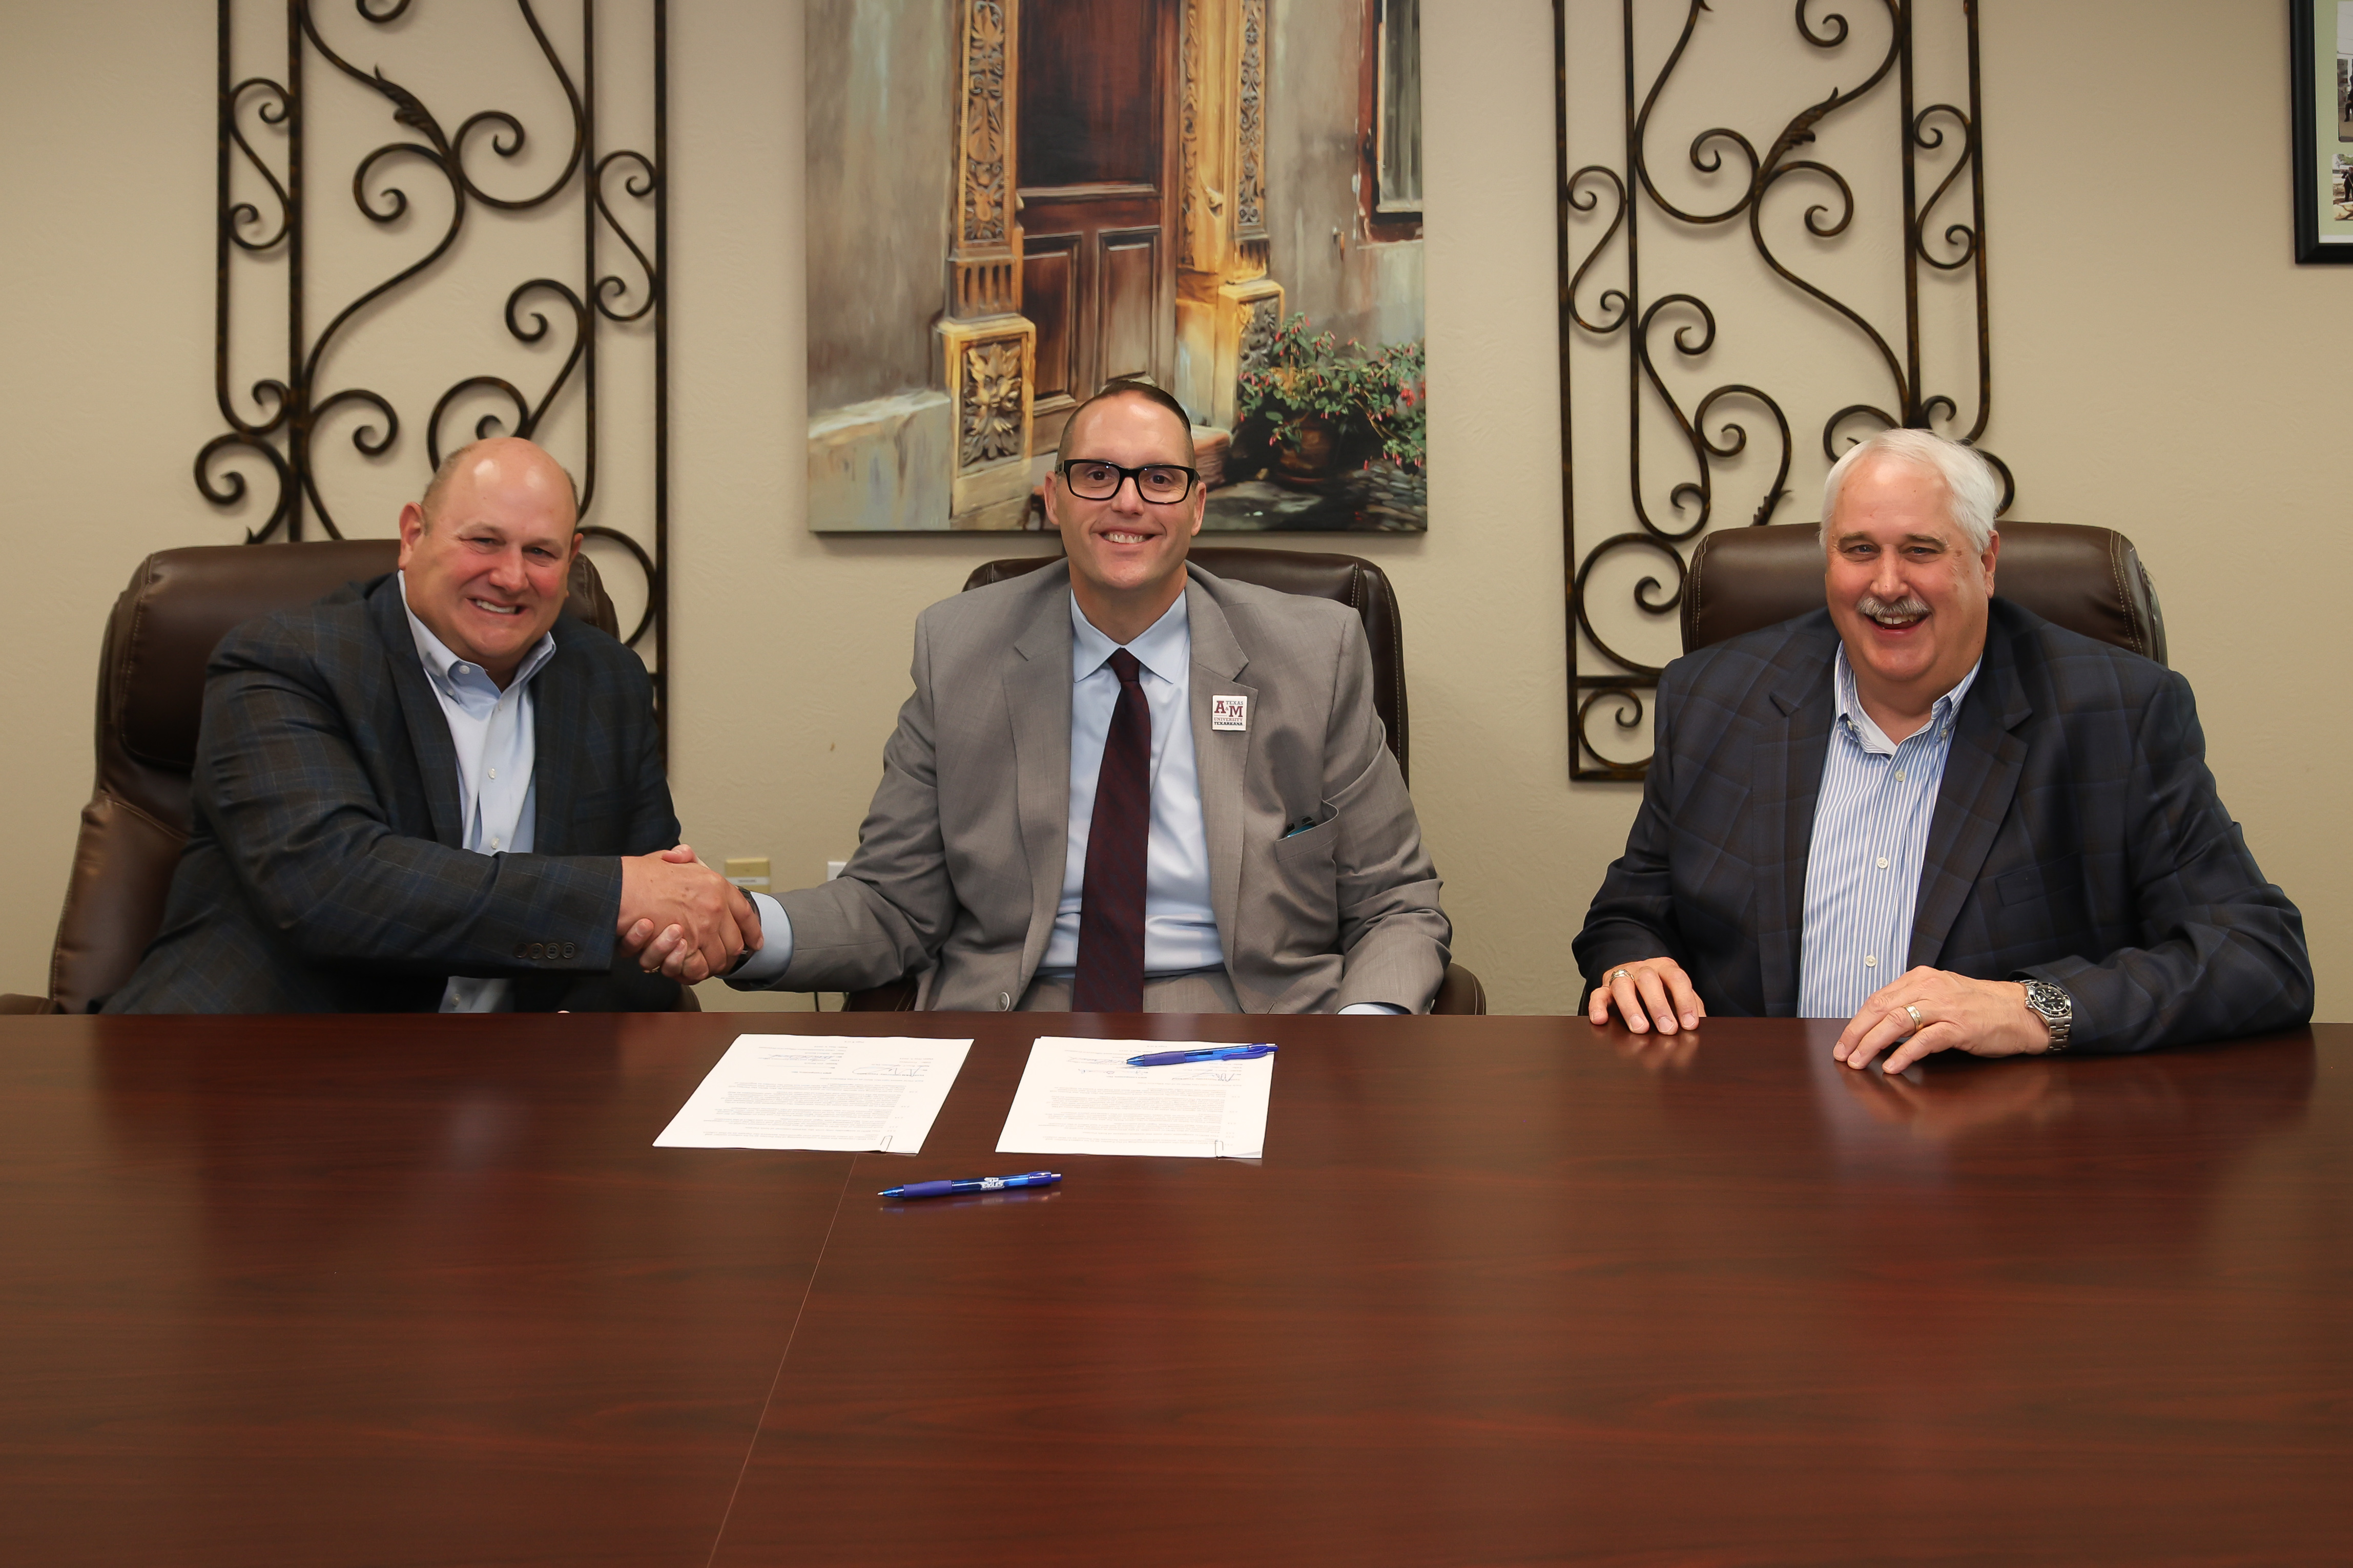 BWI Companies, Inc President and CEO Jim Bunch (left), A&M-Texarkana President Dr. Ross Alexander (center), and BWI Companies, Inc. Co-President and CAO Robert Bunch (right) sign documents establishing an academic partnership between the university and the company.